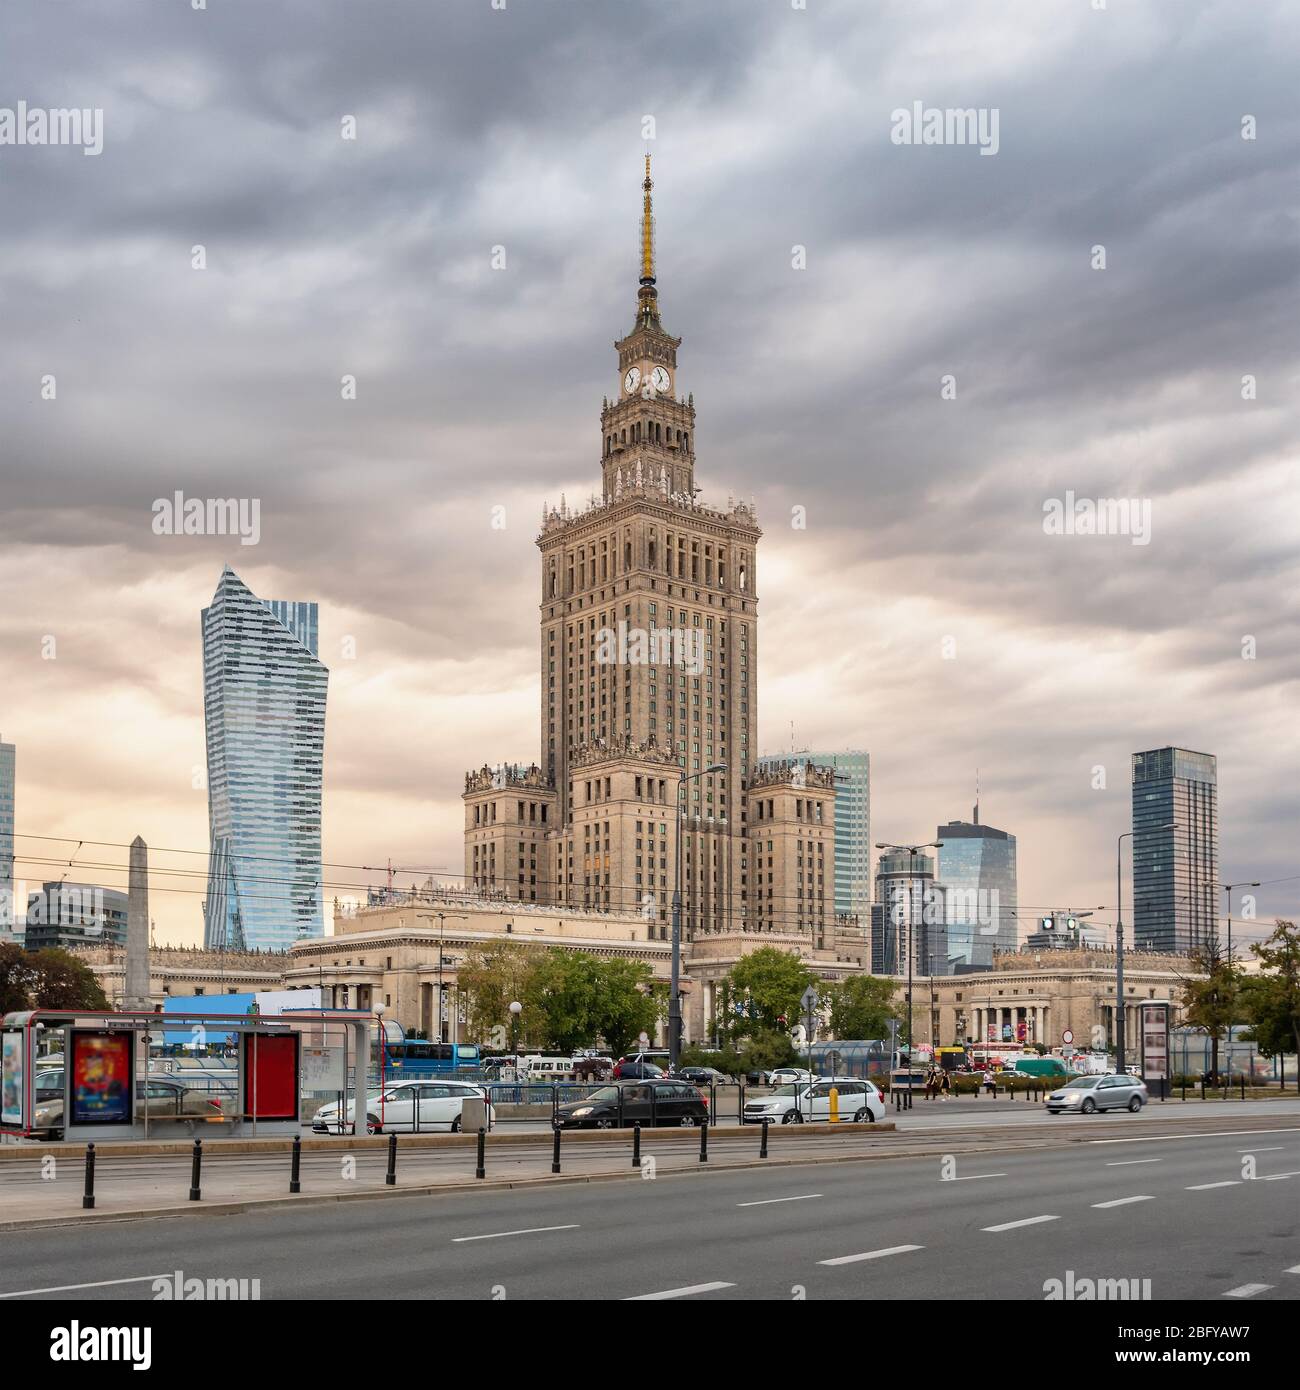 Palace of Culture and Science in Warsaw, Poland Stock Photo